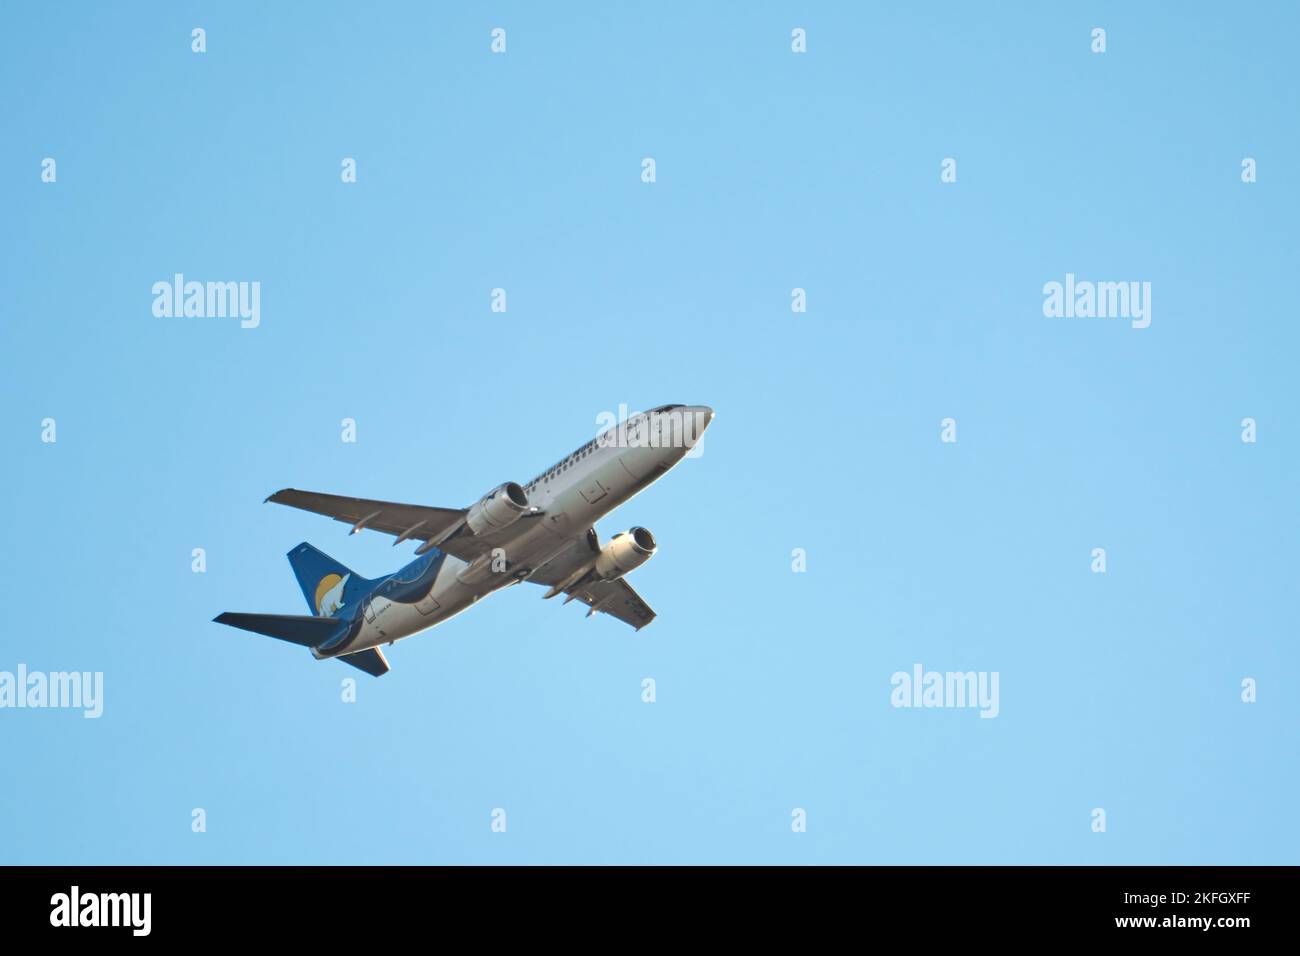 Ottawa, Ontario, Canada - November 7, 2022: A Boeing 737, operated by the Inuit-owned airline Canadian North, ascends over Ottawa after takeoff. Stock Photo